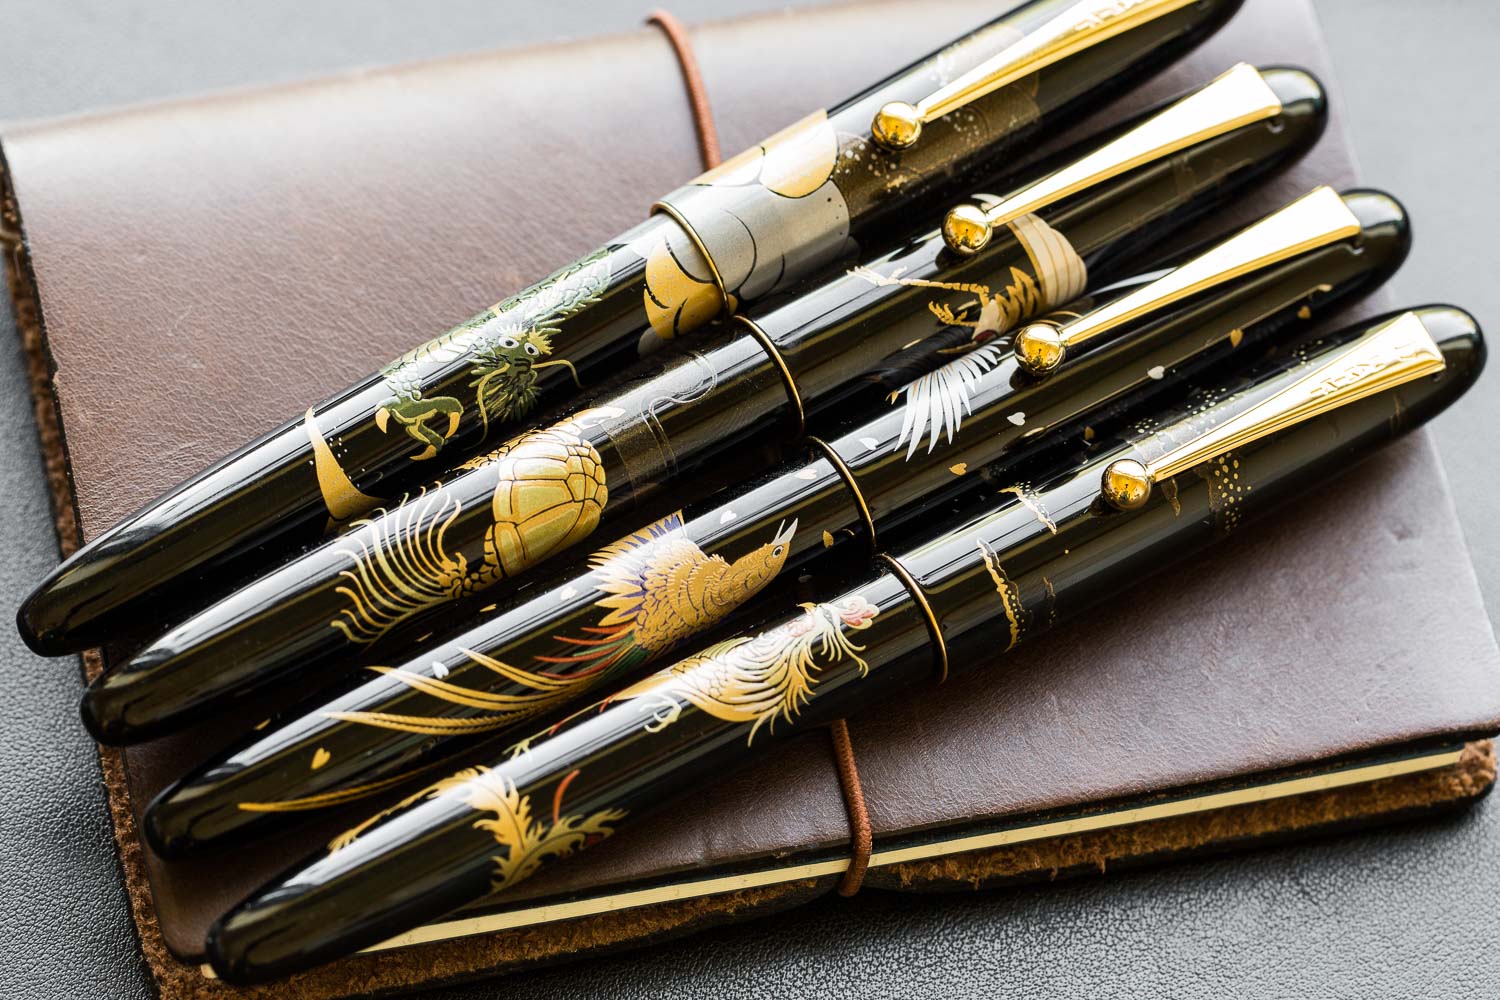 Assorted Nippon art fountain pens on leather journal